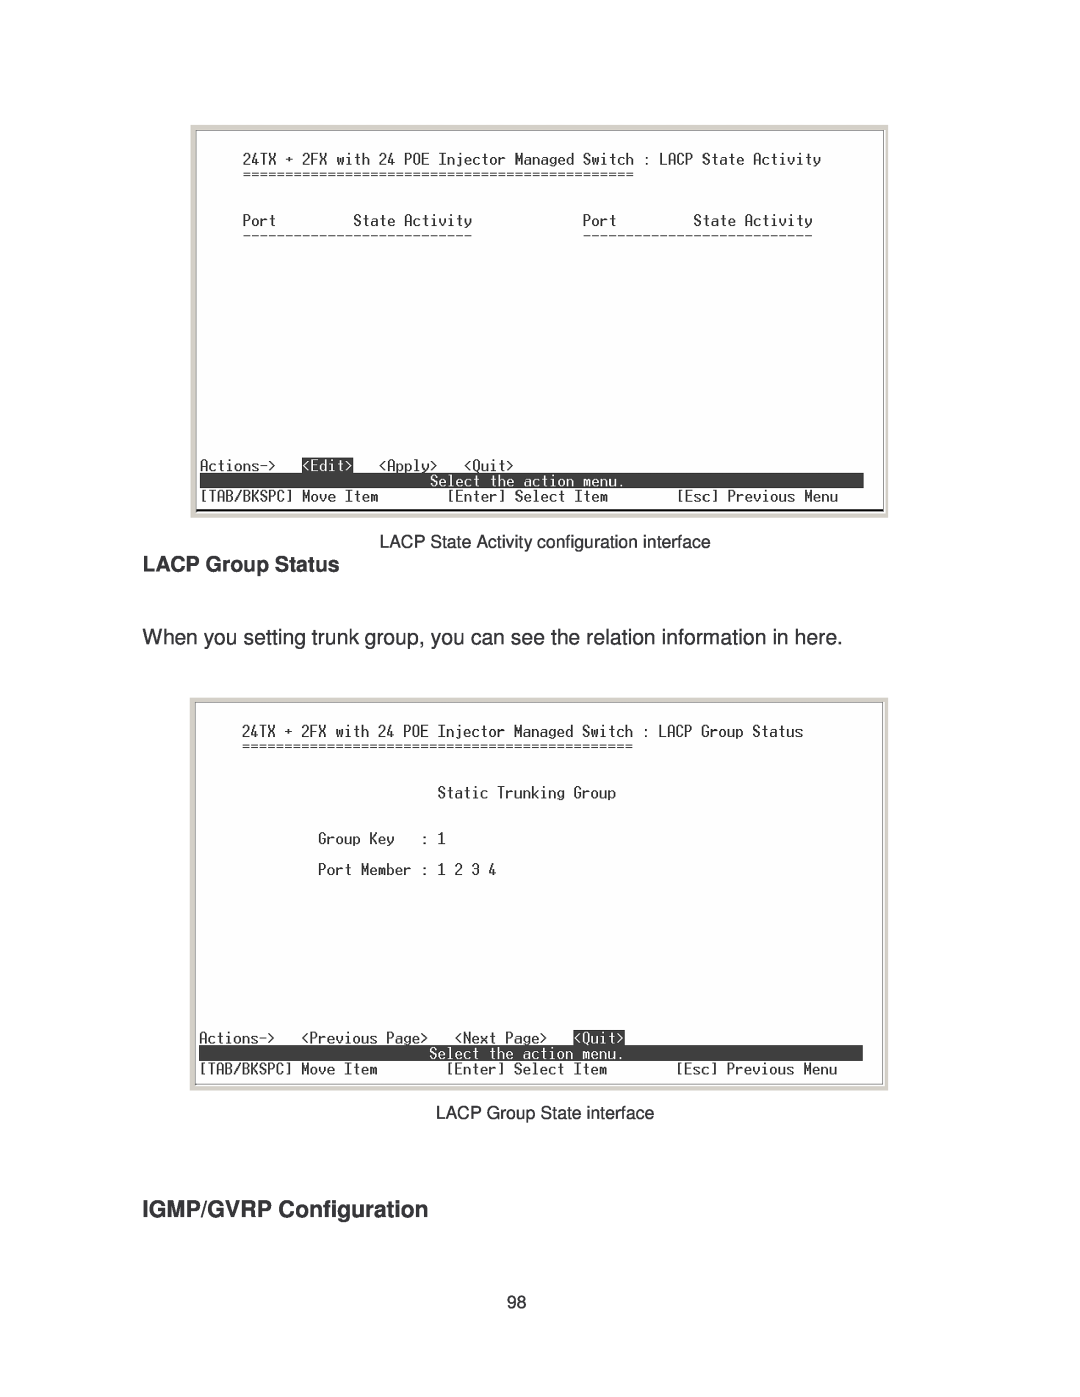 Transition Networks MIL-SM2401MAF IGMP/GVRP Configuration, LACP Group Status, LACP State Activity configuration interface 